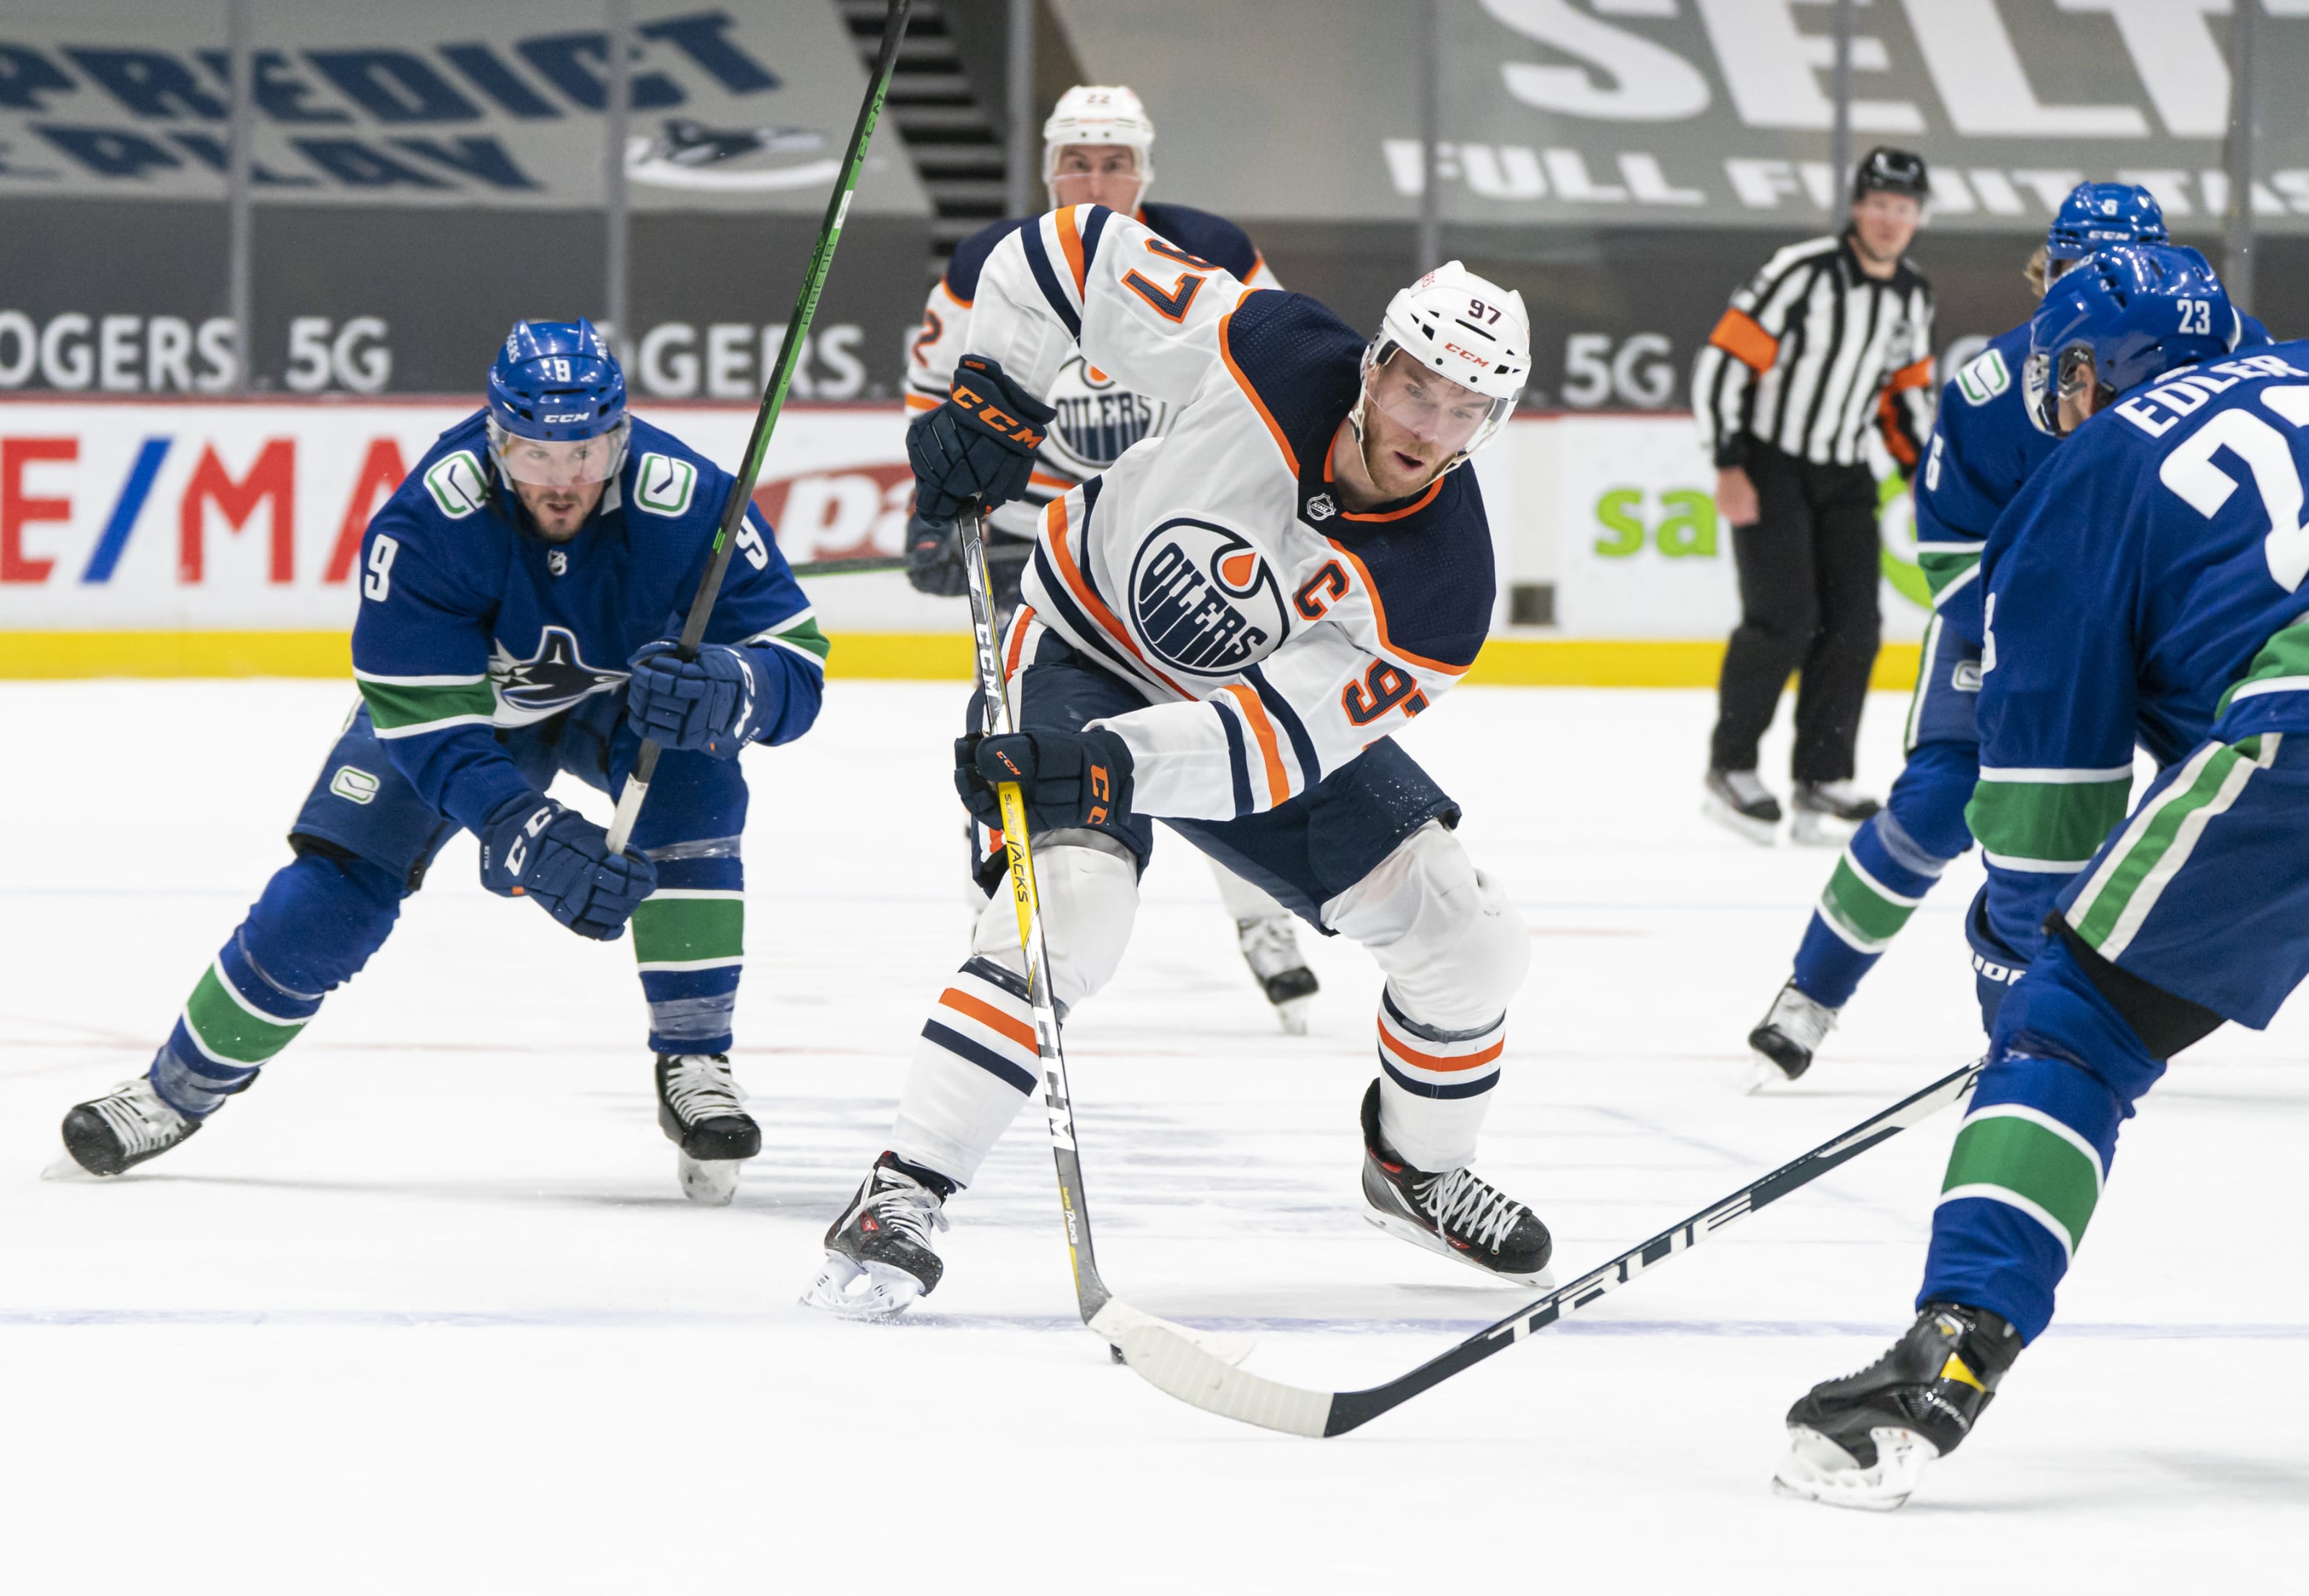 Interesting thought: Oilers are ditching the orange for the playoffs.  Canucks ditched the orca for their final home games. Both teams are allowed  to remove a jersey next year (3 year rule).